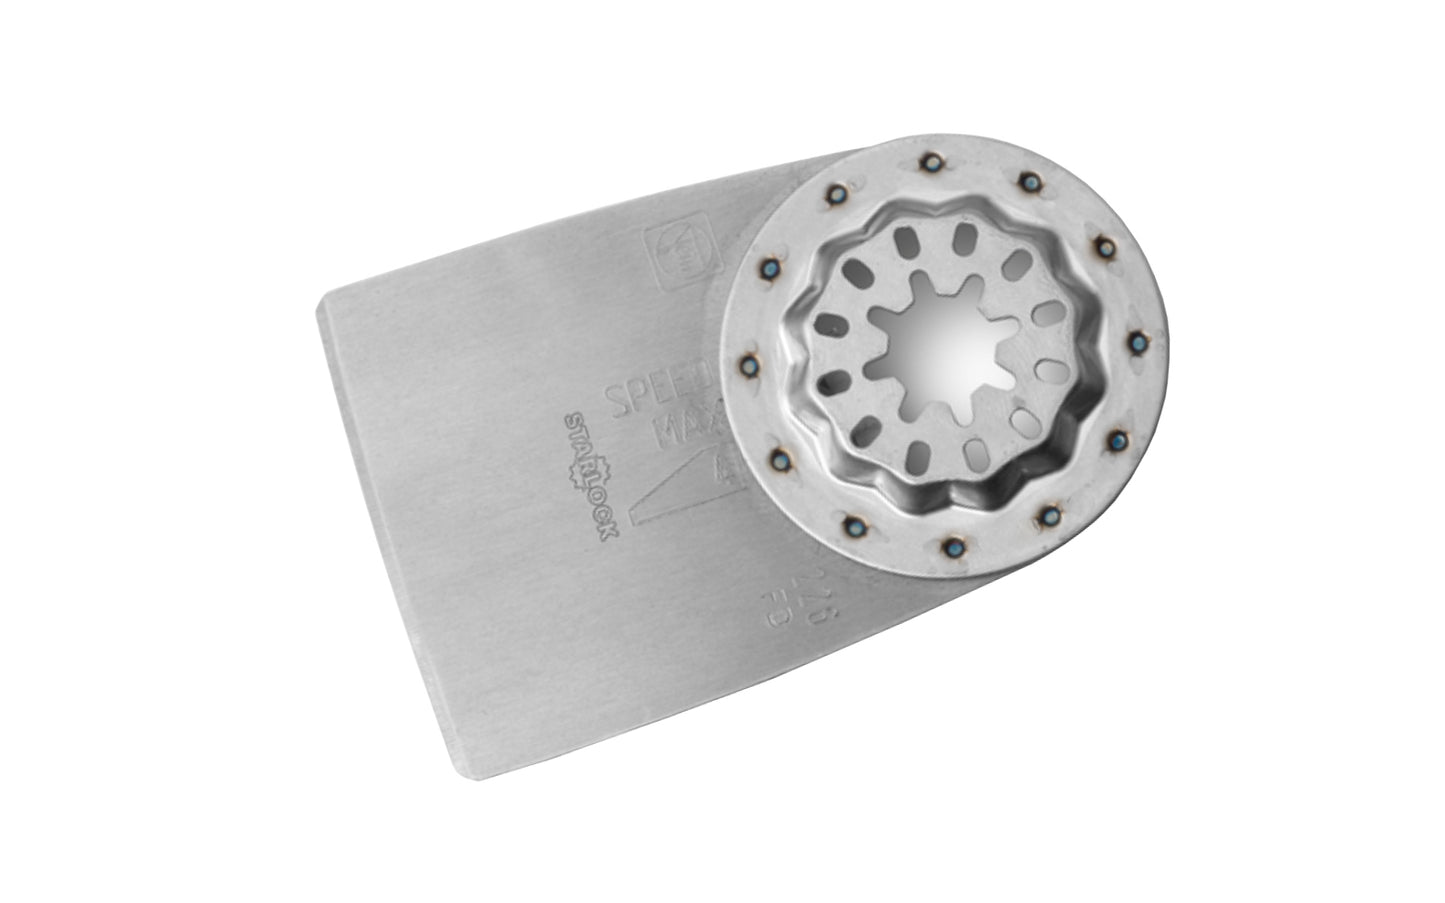 Fein Tools Special Material Rigid Scraper Blade - 226 Blade. Short blade version. Designed for removal of stubborn paint, adhesive residue, carpet, tile adhesive, & underseal. Starlock mounting system.   Made in Germany. Model No. 63903226210. Scraper Oscillating Blade 2-1/16" Wide Blade